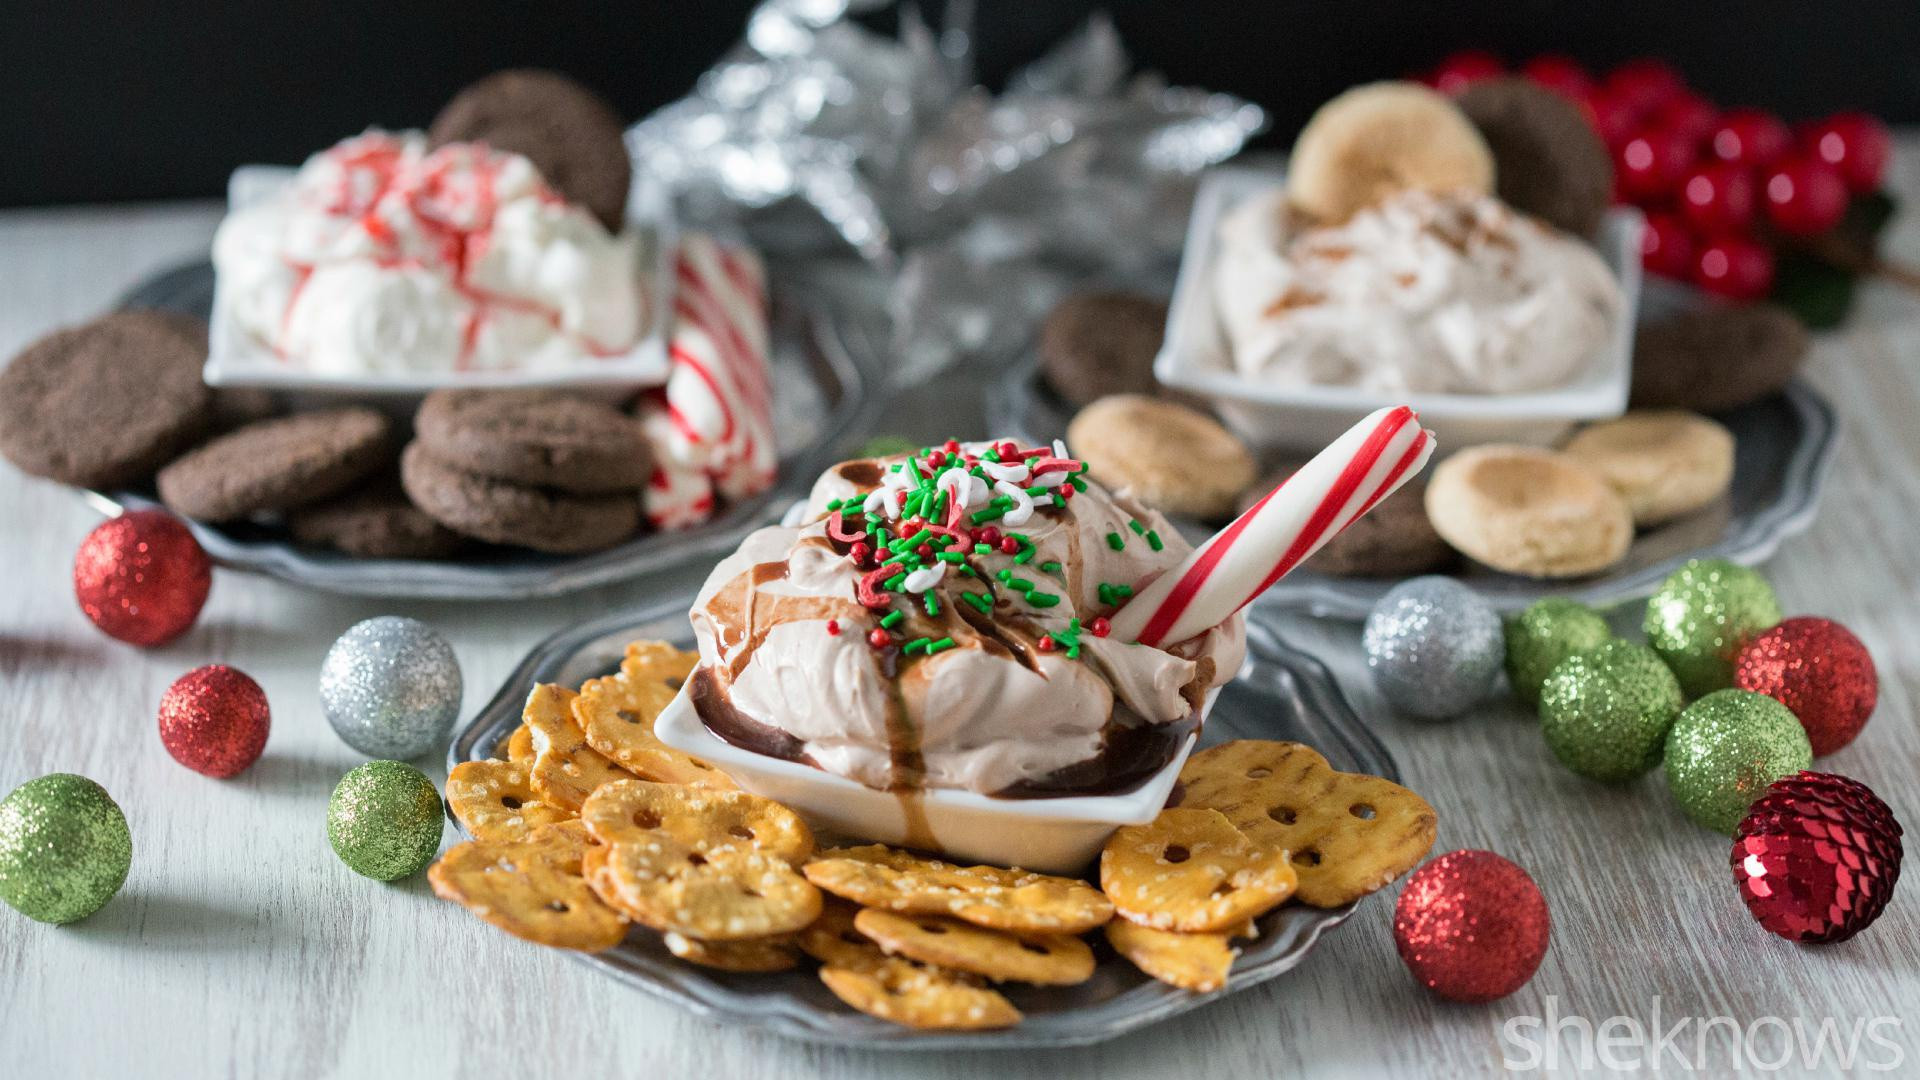 Decadent Christmas Desserts
 3 Decadent dessert dips in all your favorite holiday flavors